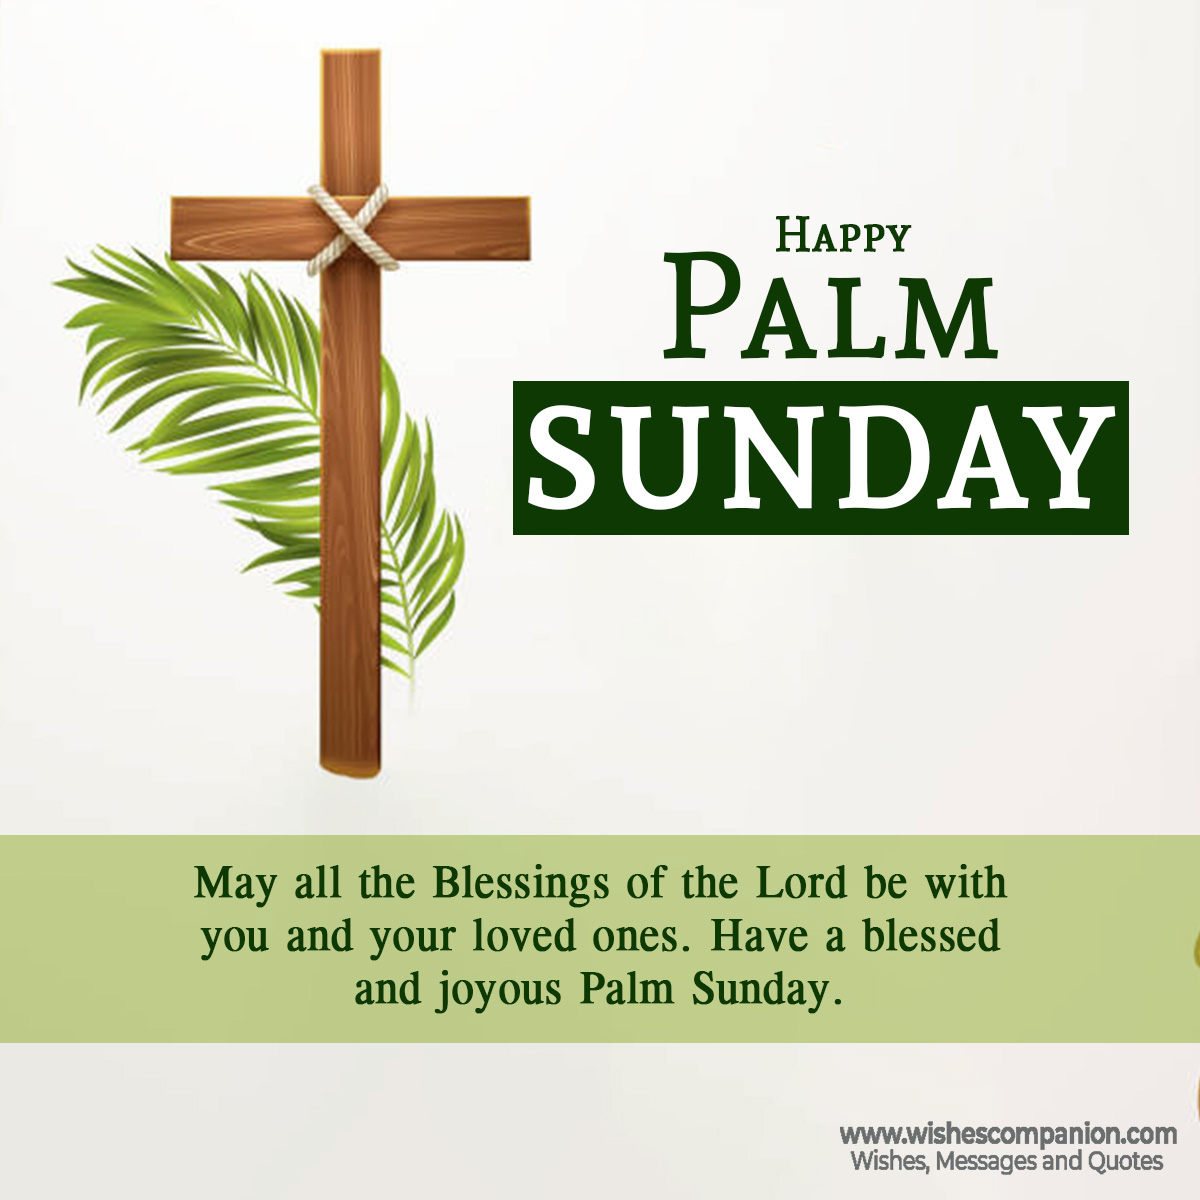 Palm-Sunday-wishes-and-Greetings